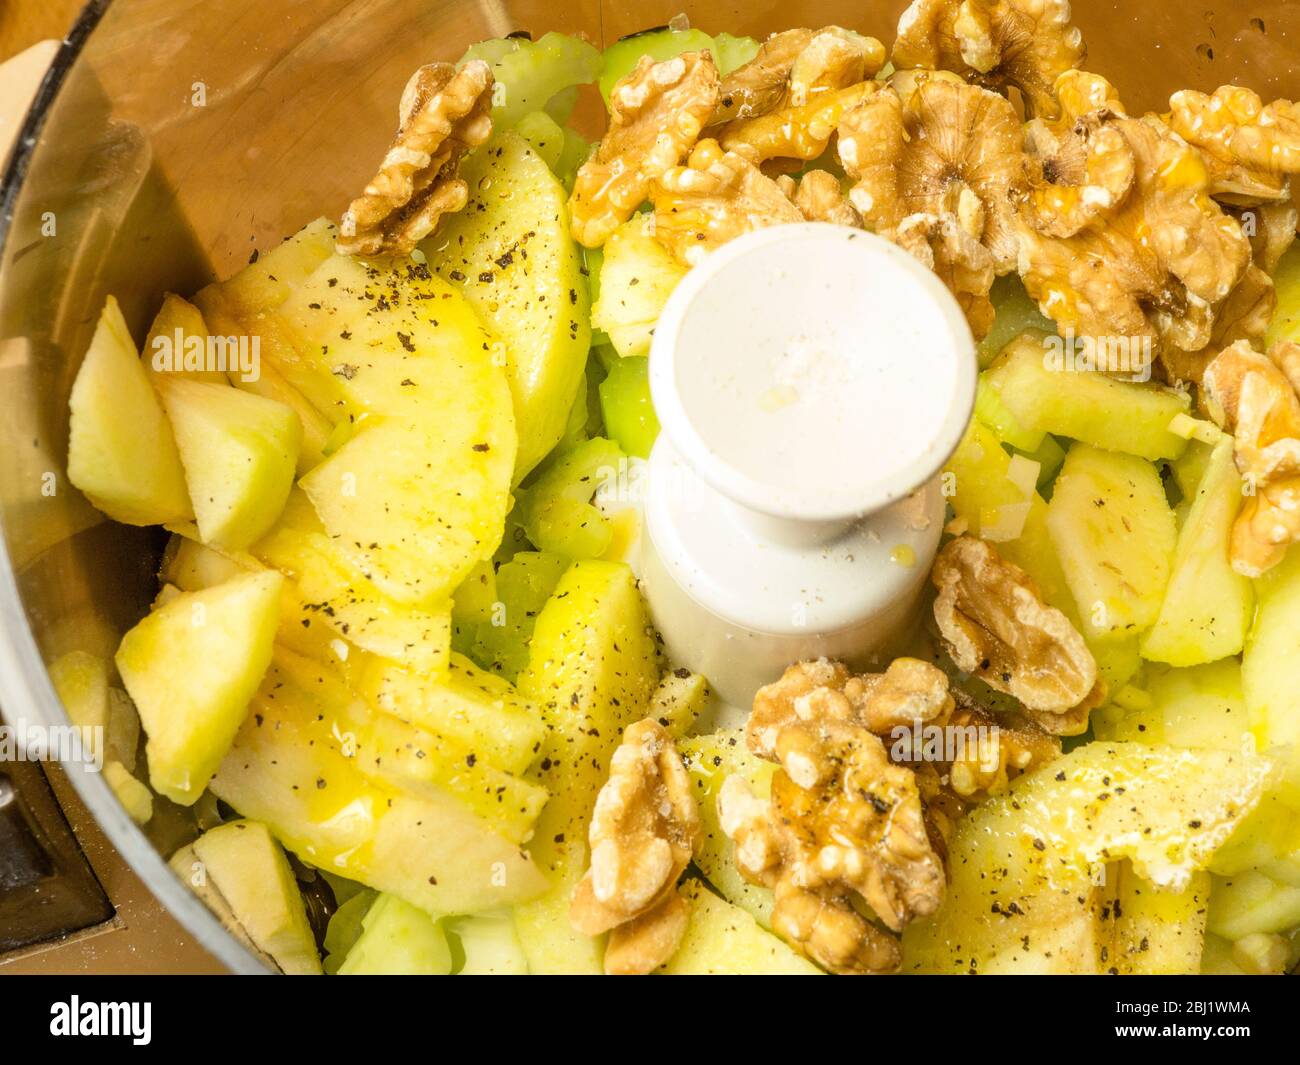 Ingredients for celery soup based on Waldorf salad in a food processor ready for blending Stock Photo